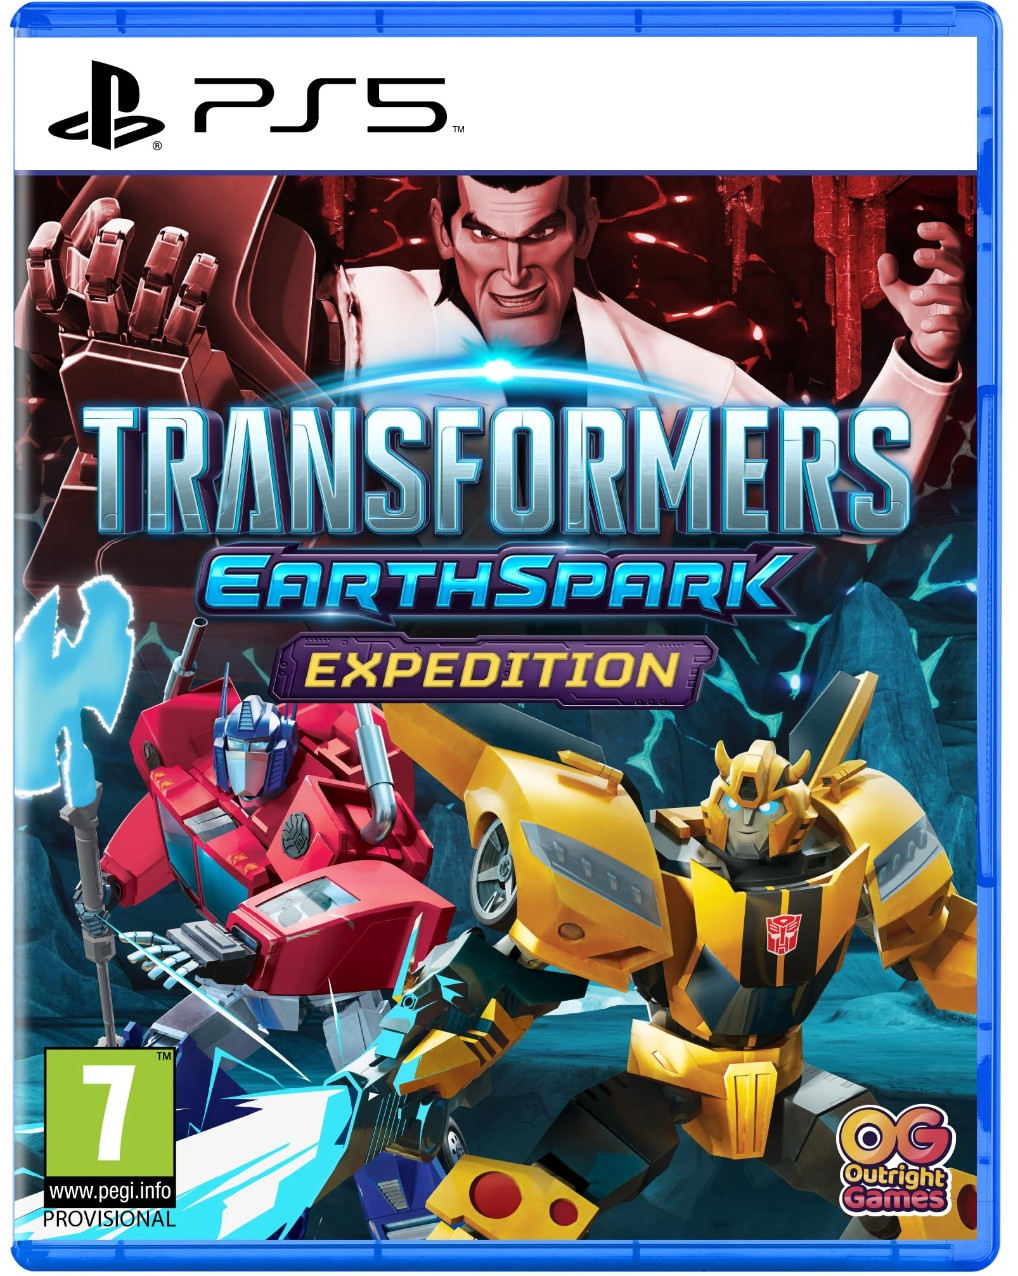 Transformers: Earthspark Expedition (PS5), Outright Games